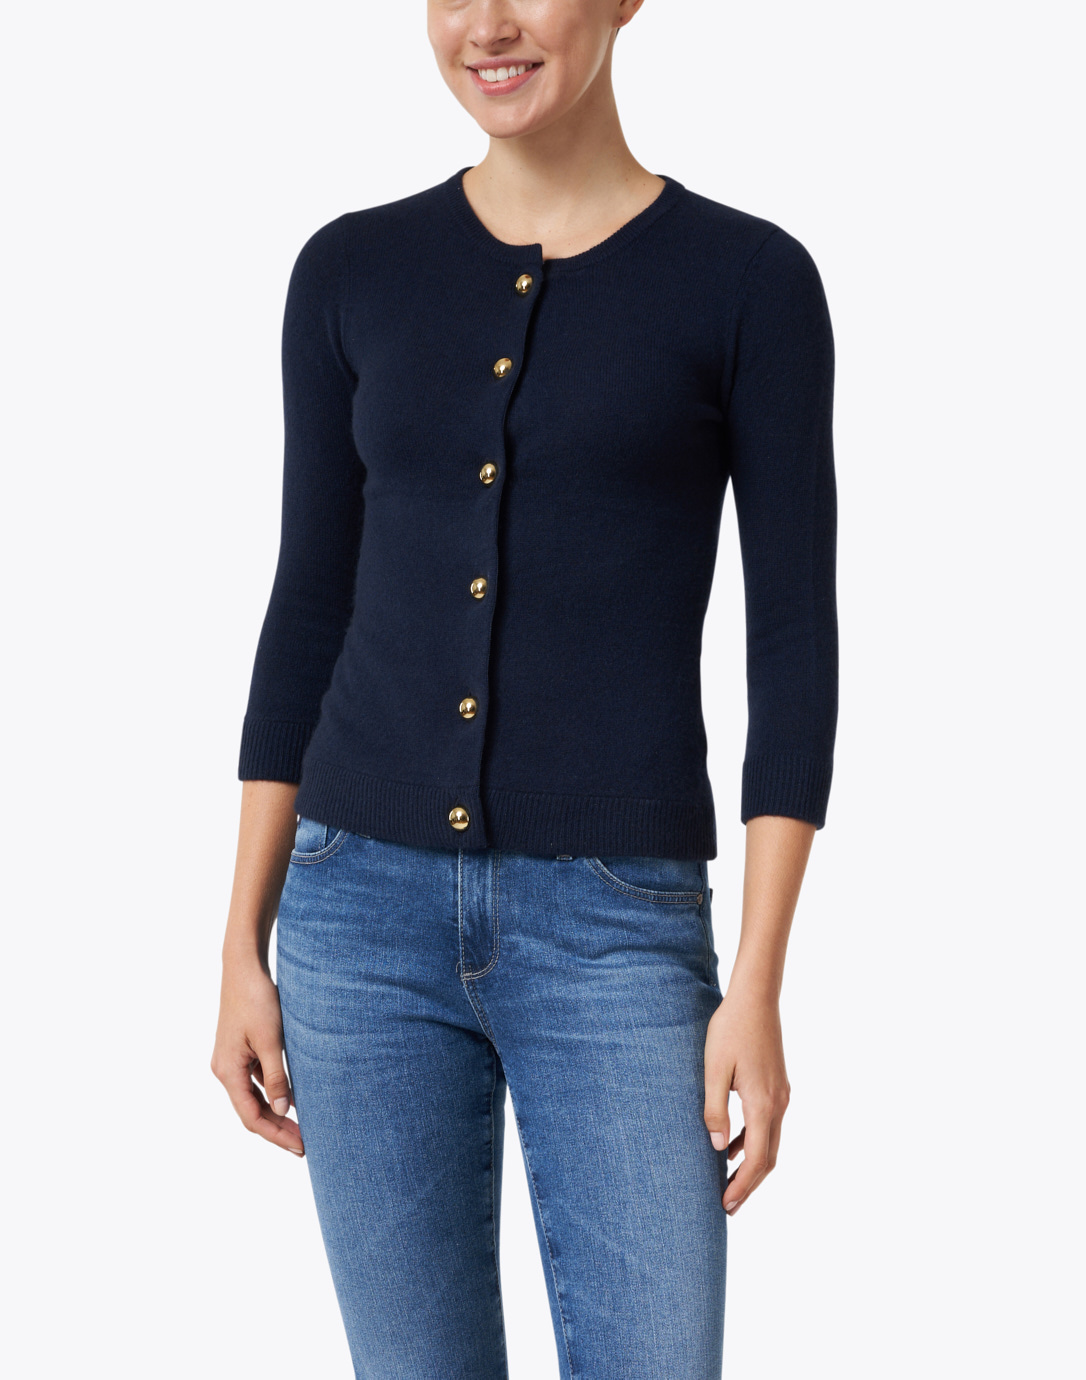 Navy Cashmere Cardigan with Gold Buttons | Cortland Park | Halsbrook